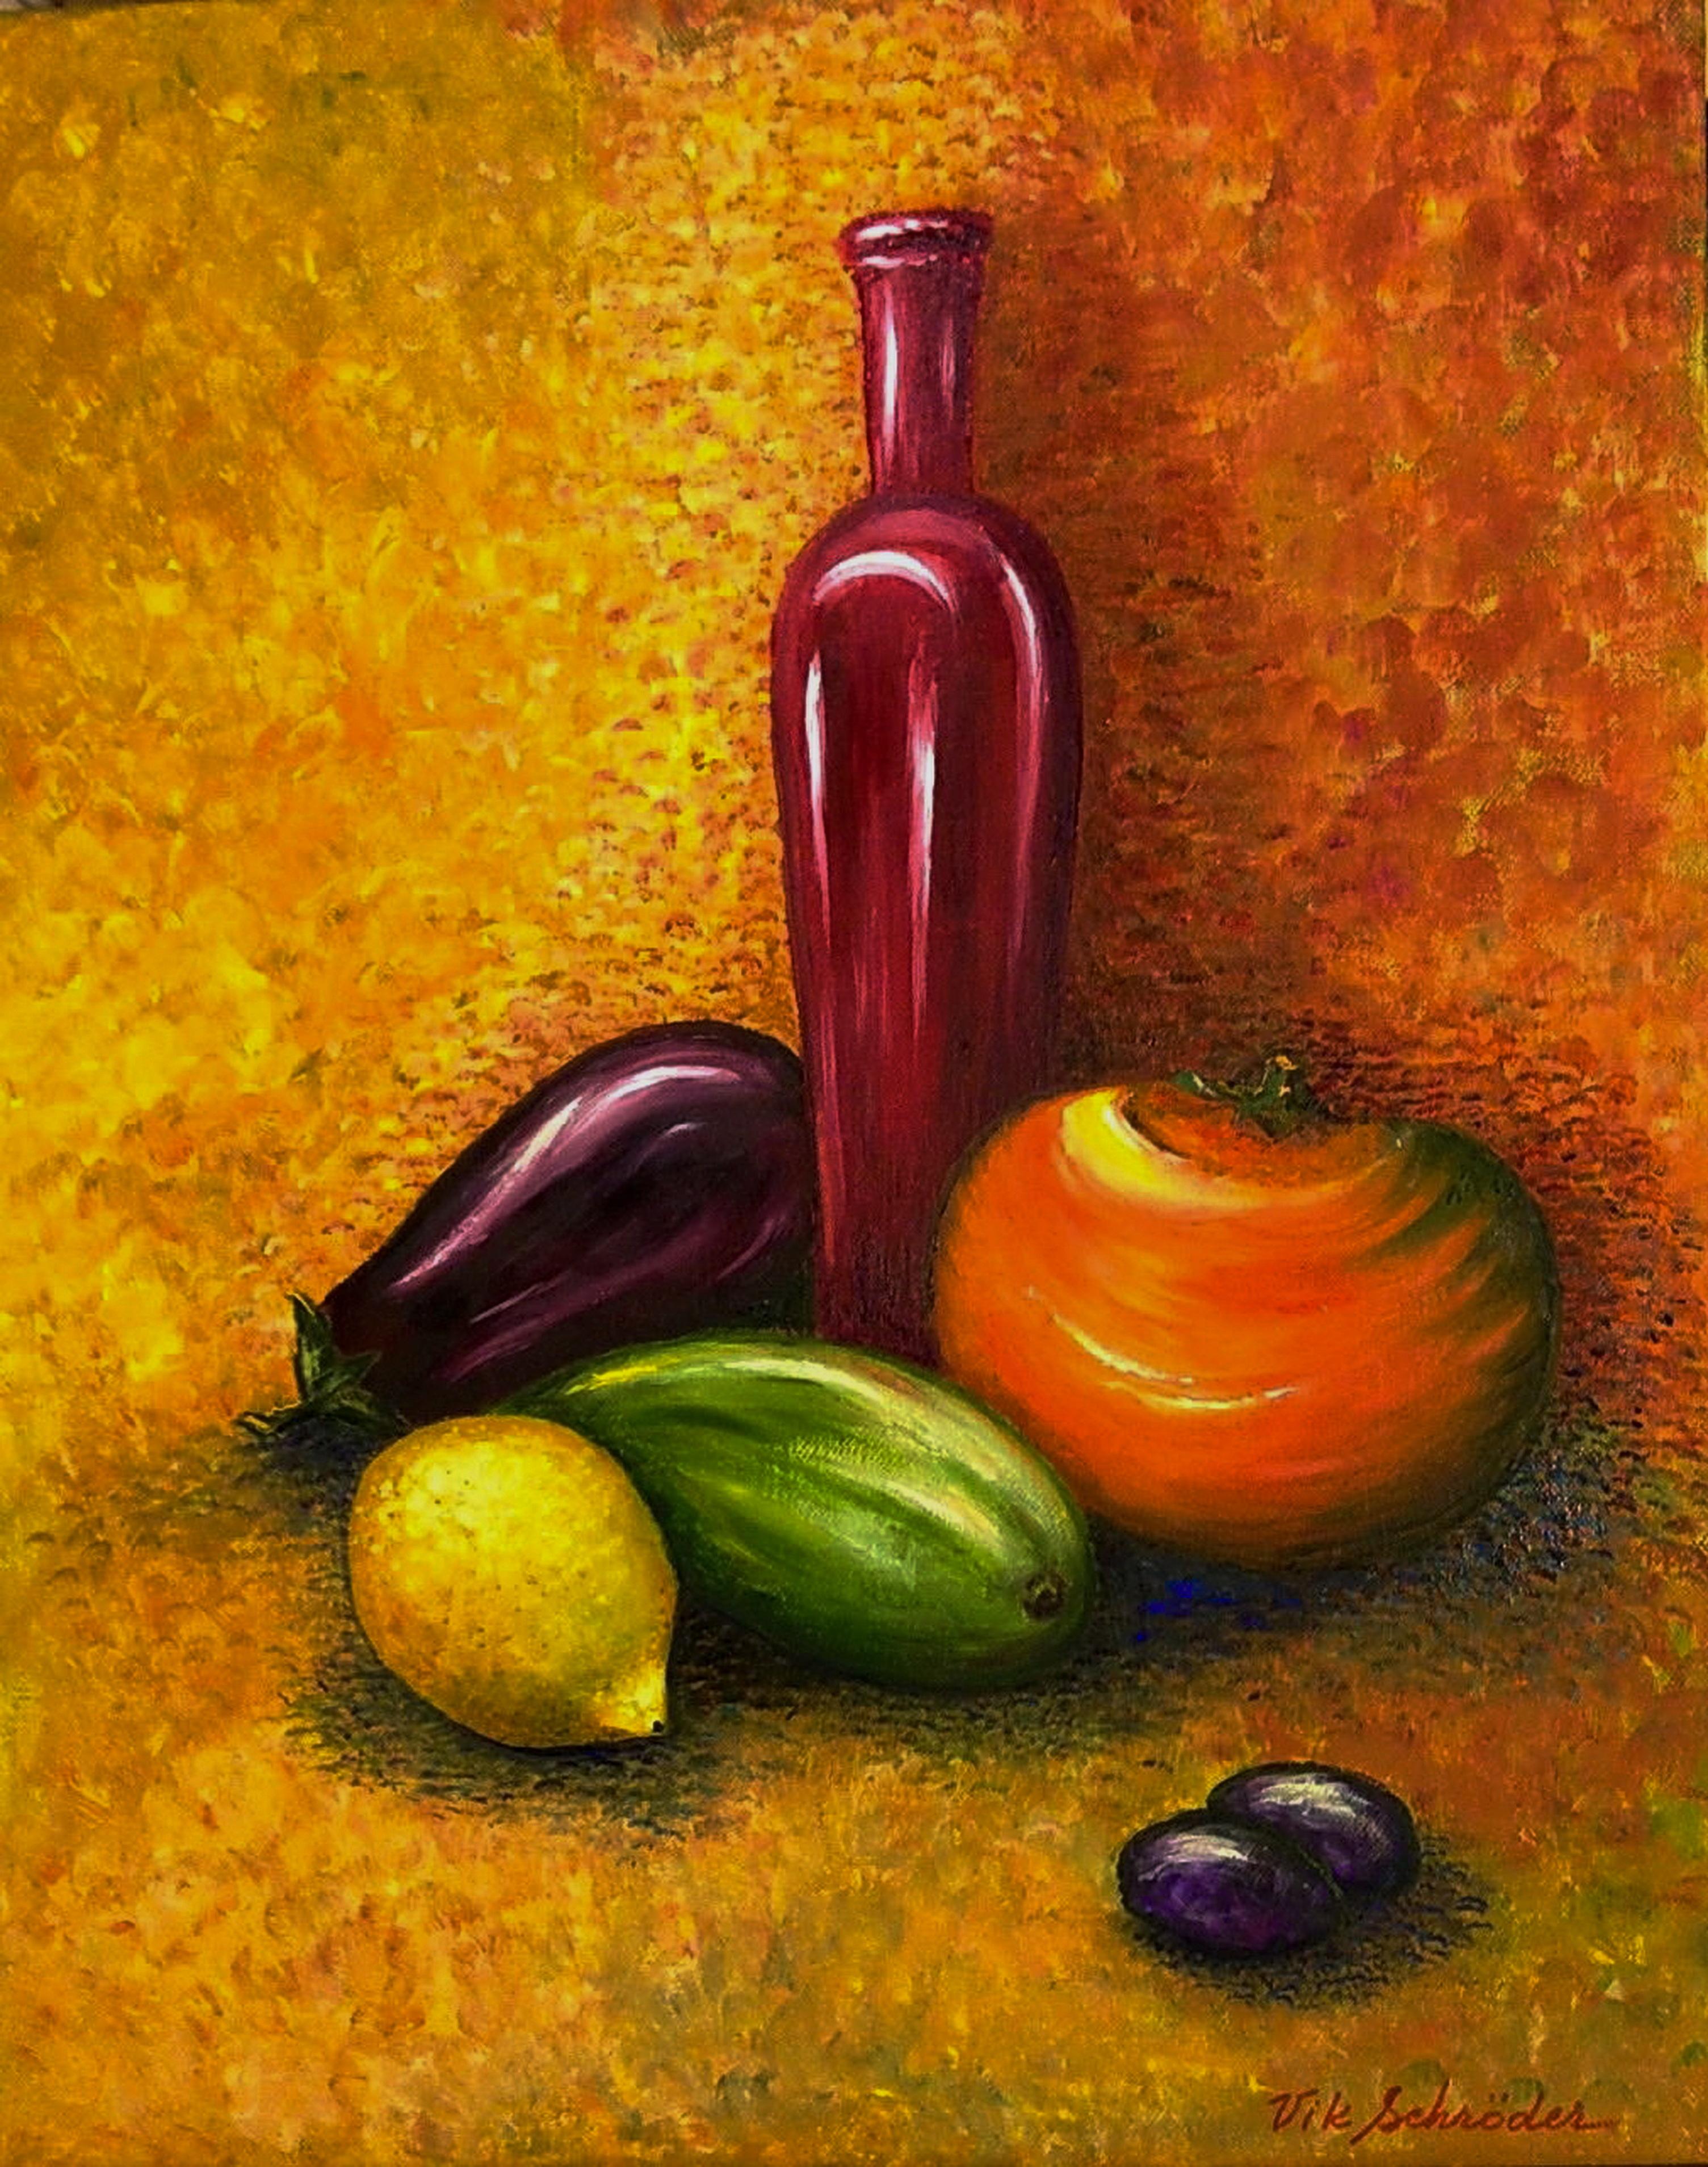  It may be healthy. Oil painting. Impressionism style. Still life 50/40 cm. - Painting by Vik Schroeder 